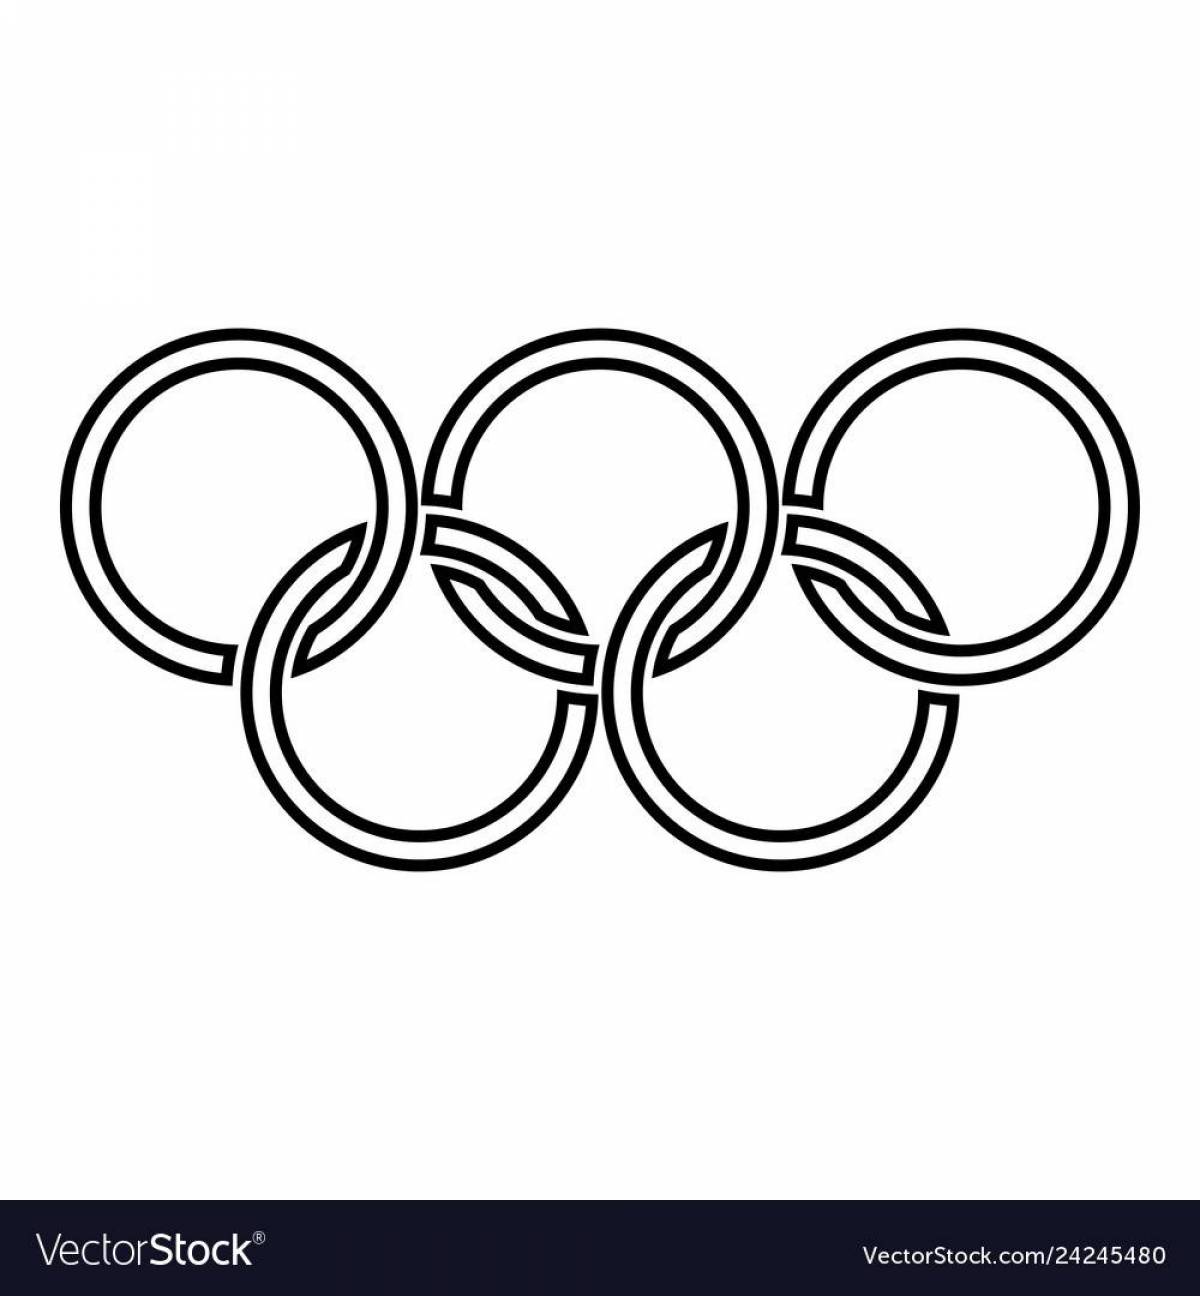 Glorious olympic rings coloring page